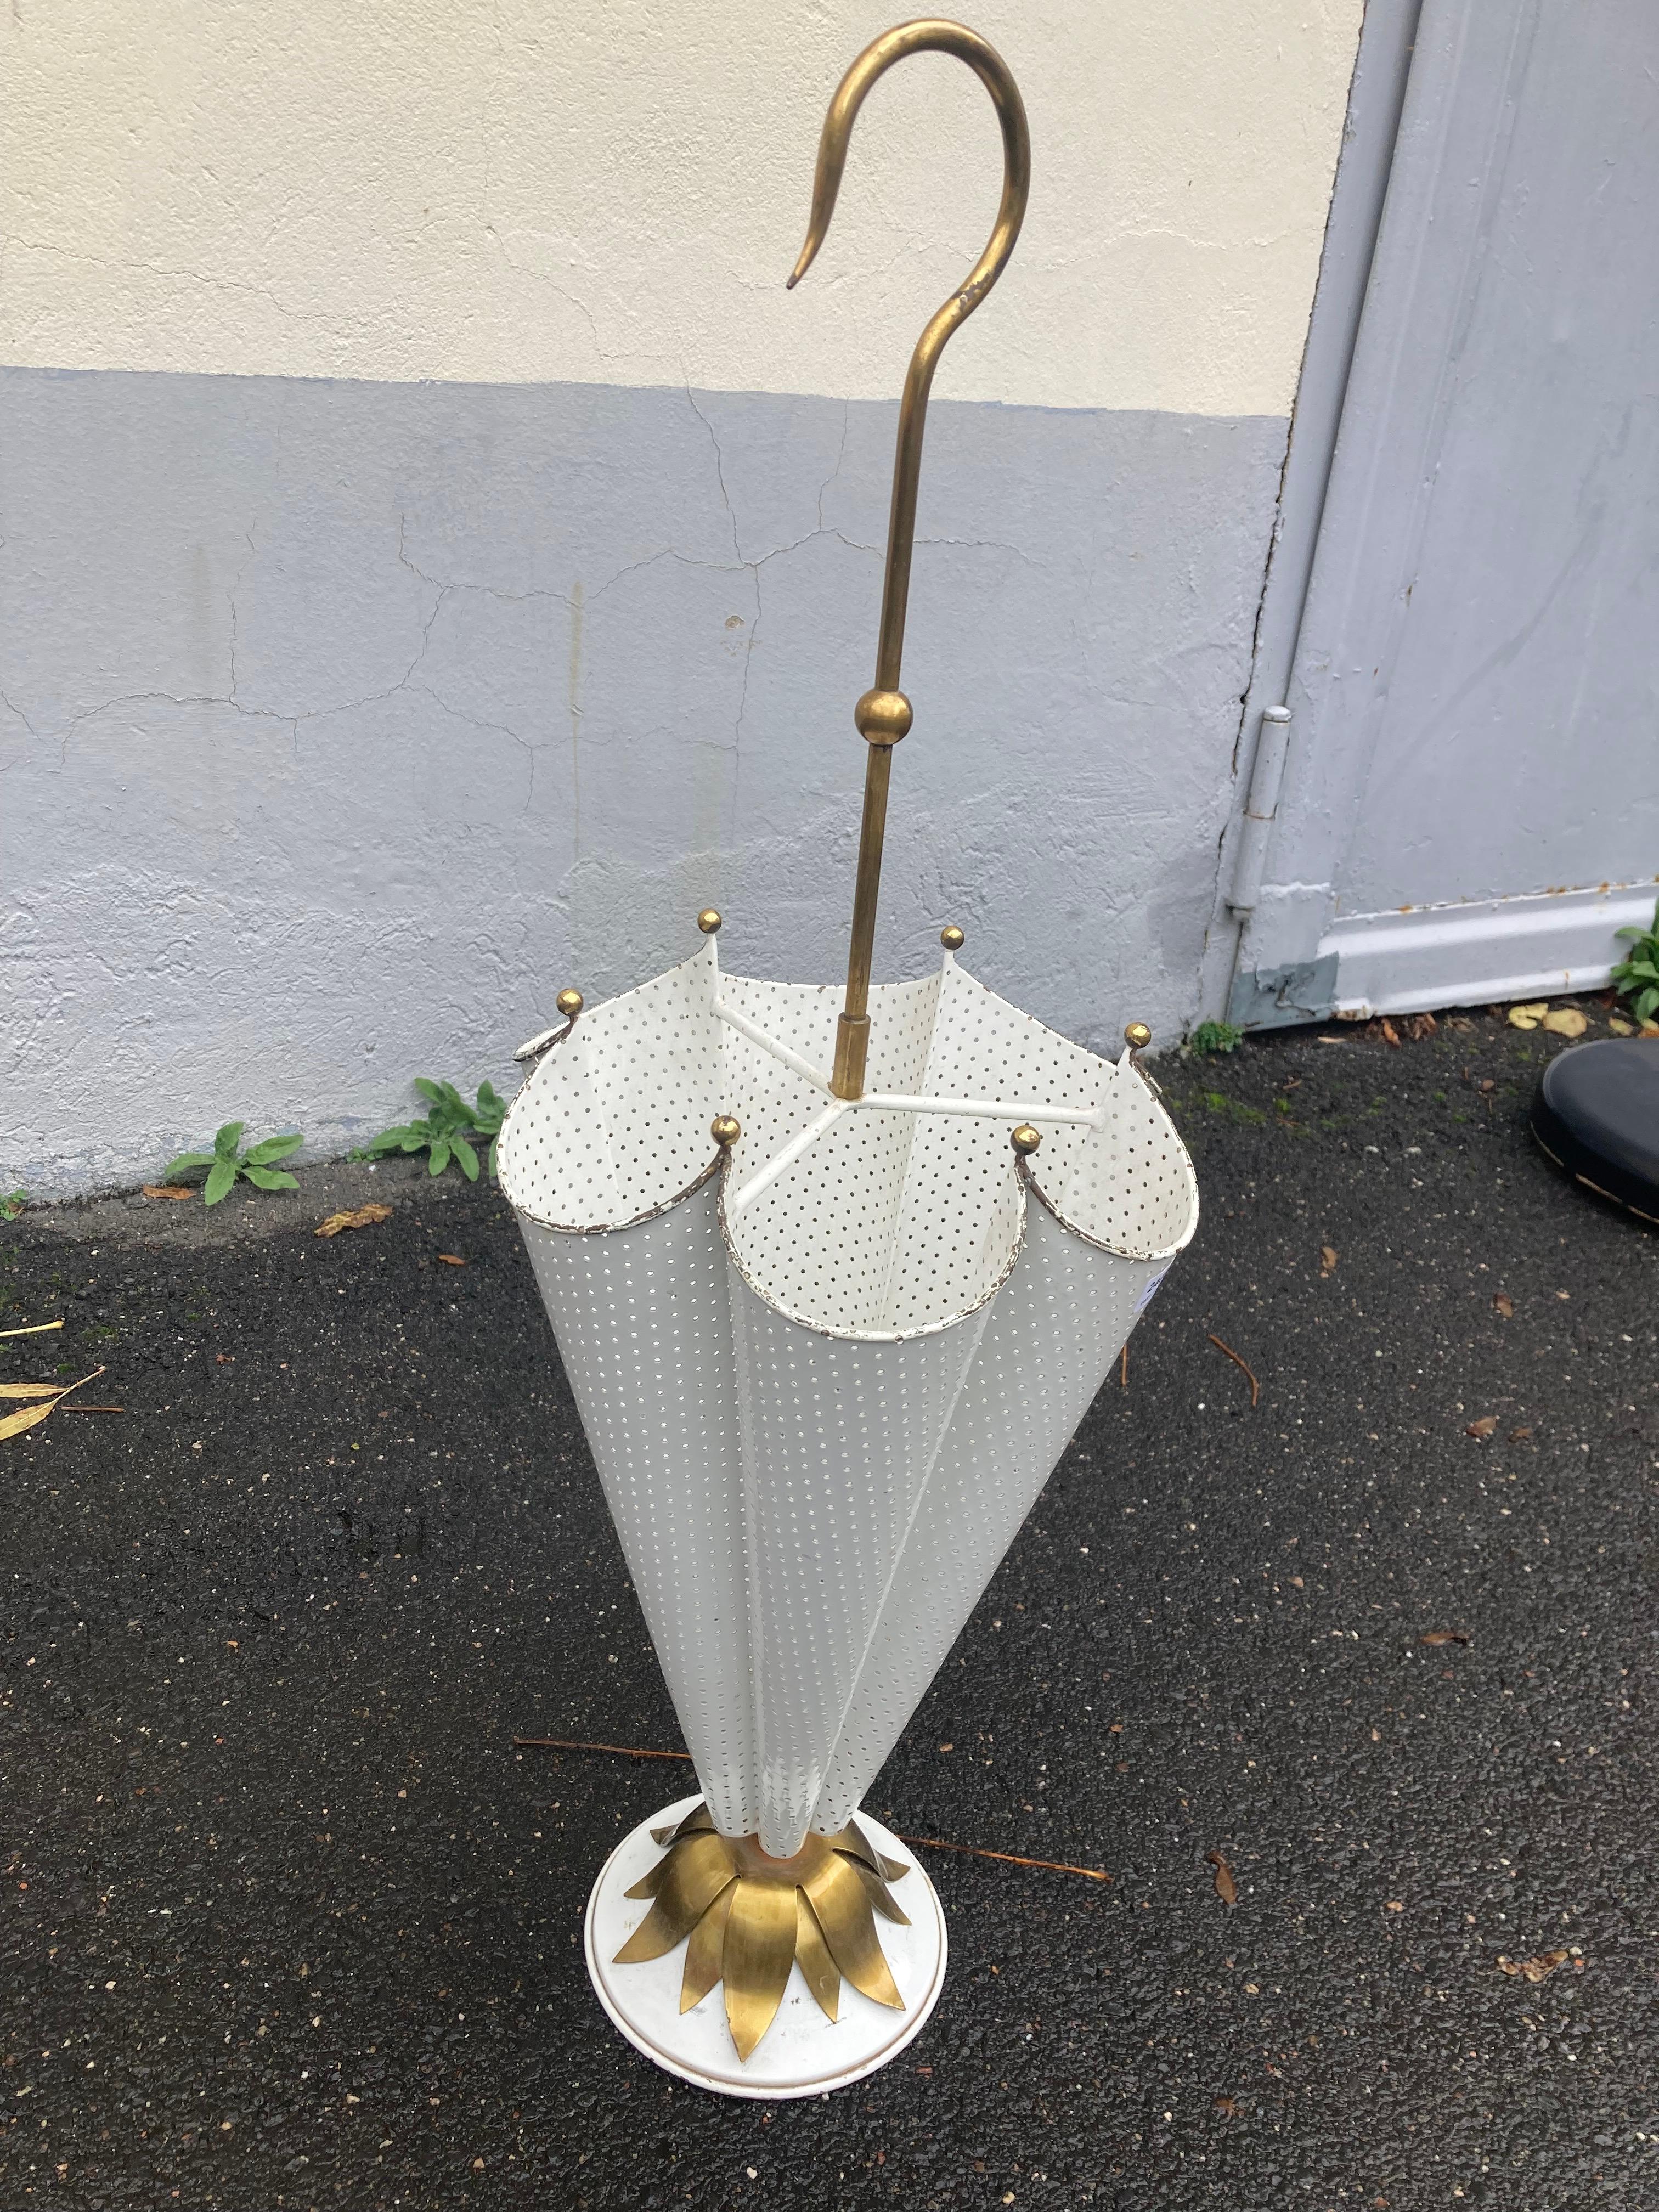 Amazing French Mid Century umbrella stand attributed to Matthieu Matégot. 1950s.
Made of Ivory colour to off-white enameled and performed metal combined with brass elements. Designed to an umbrella shape with handle. It is not only a decorative